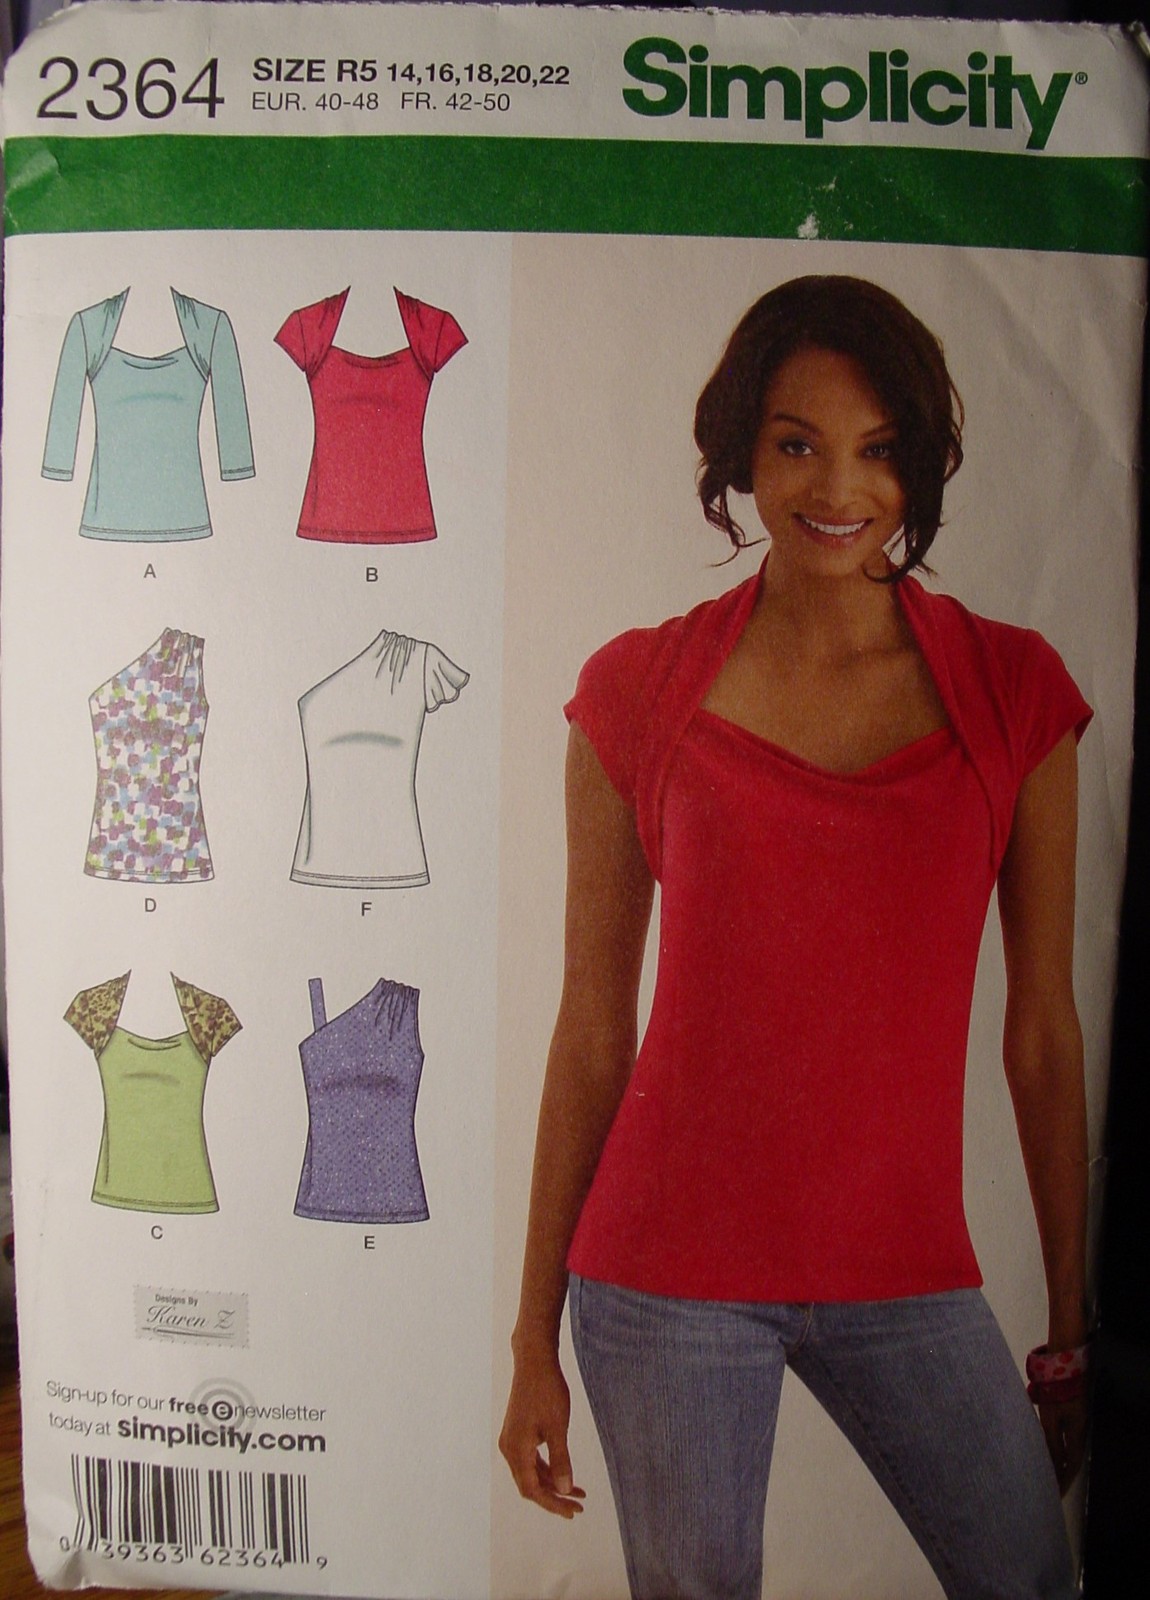 Sewing Pattern size 14-22 Misses Shirts Stretch Knits only 2364 Uncut - $5.99